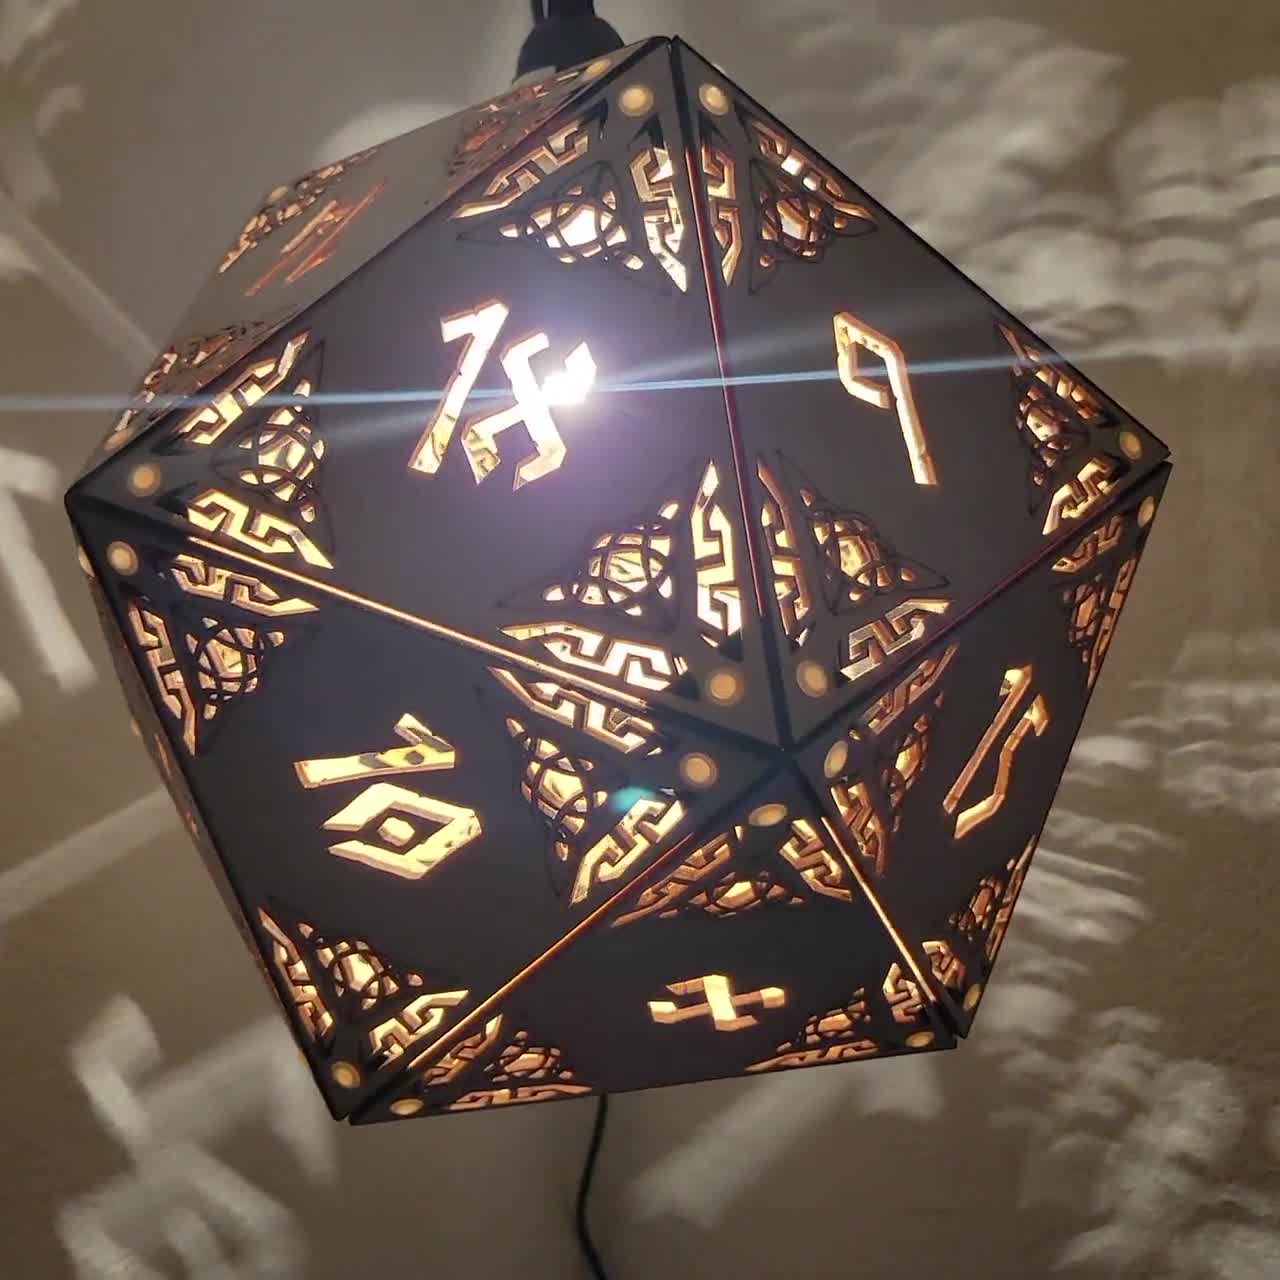 dragons Table lamp dado 20 magic dnd dungeons wooden d20